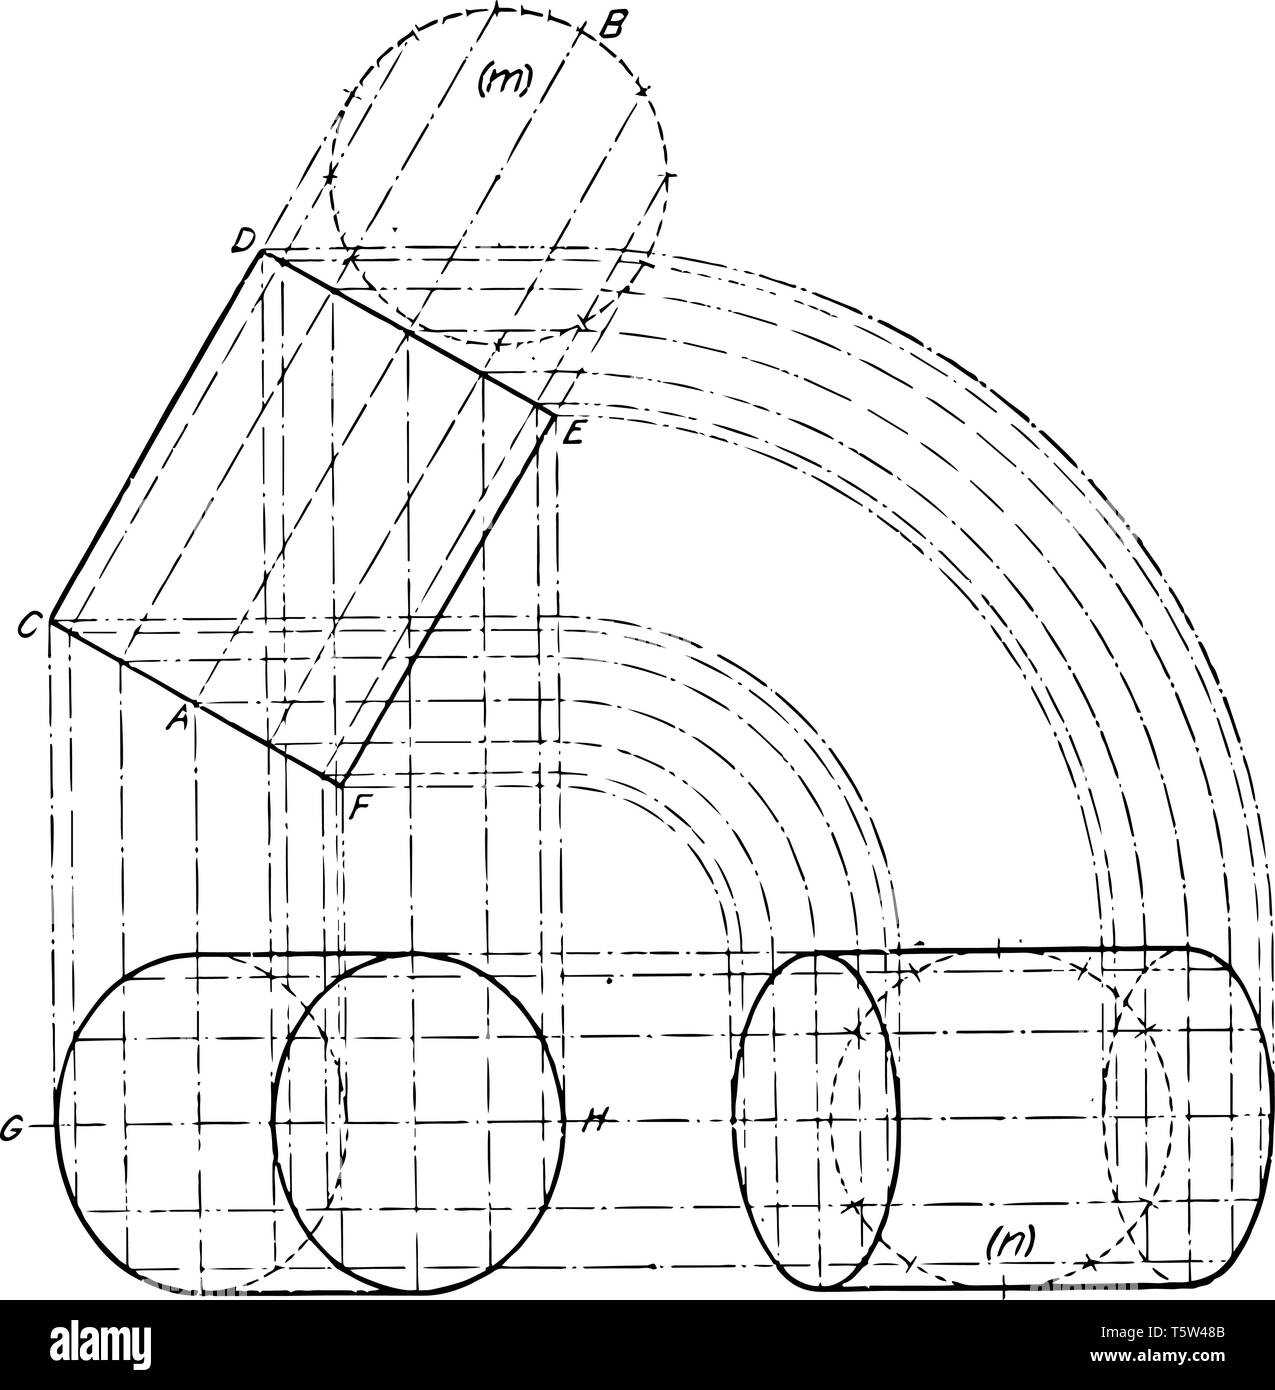 The image shows the three-axis plane Projection of the cylinder. It is a graphic layout of projections to build a cylinder from the base of the cylind Stock Vector